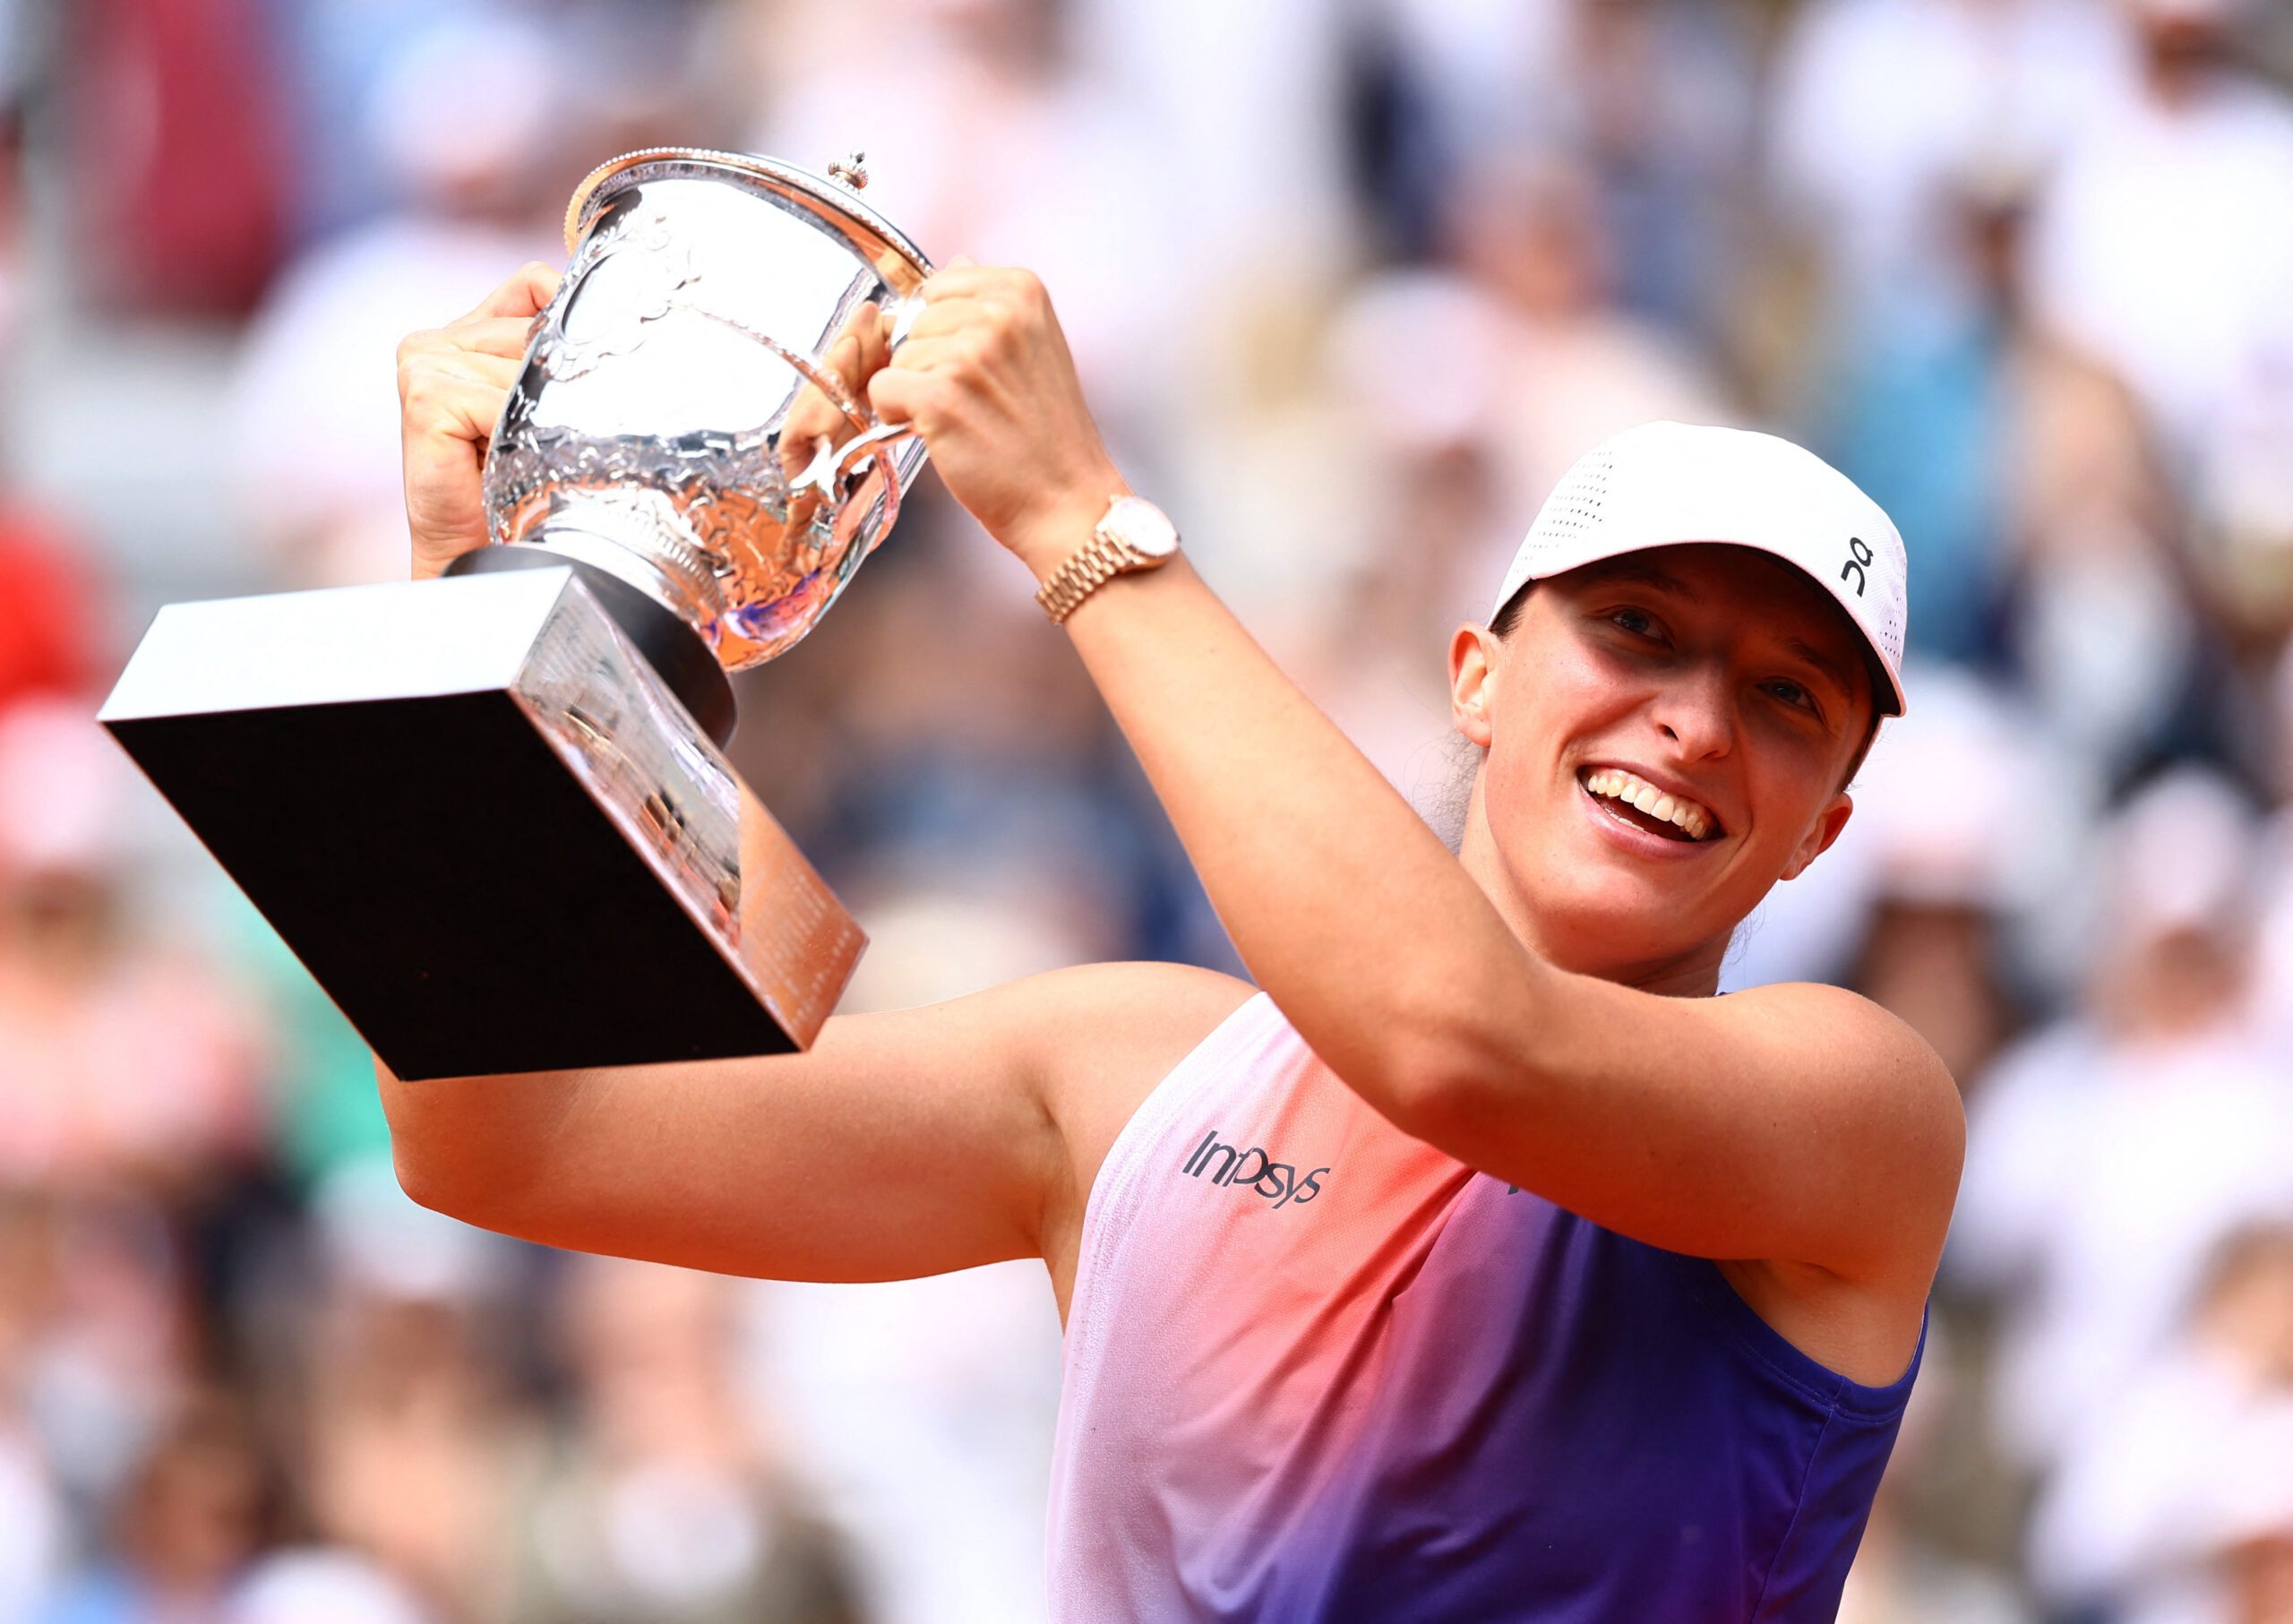 Clay court queen: Swiatek dismantles Paolini for French Open three-peat